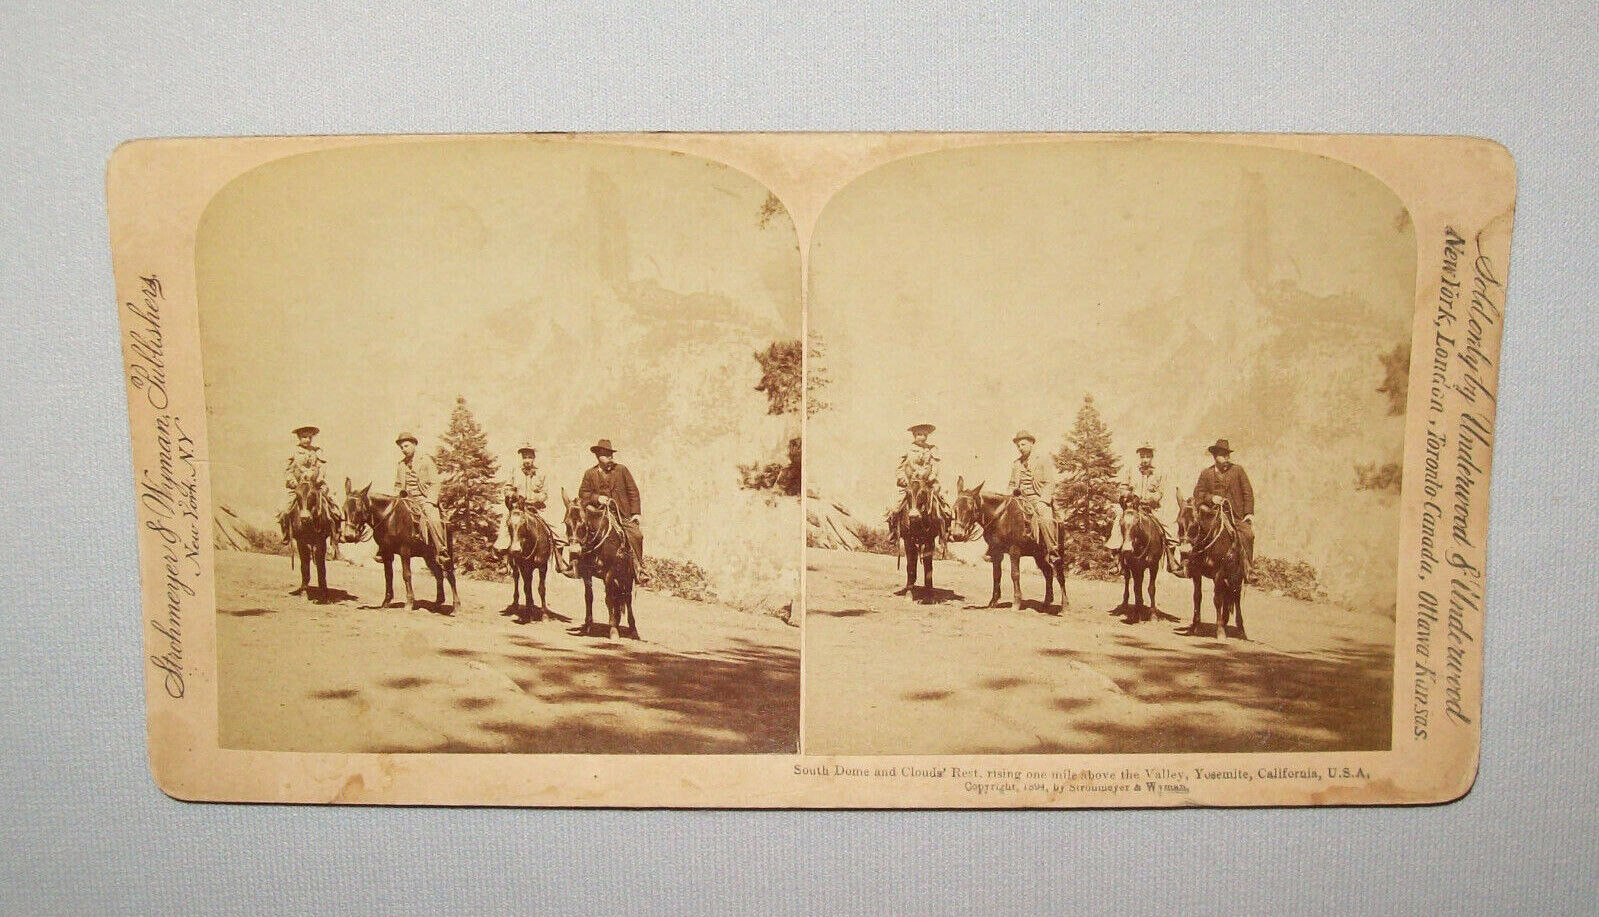 Antique Vtg 1894 Riders Horseback South Dome Clouds Rest Stereoview Photo Card